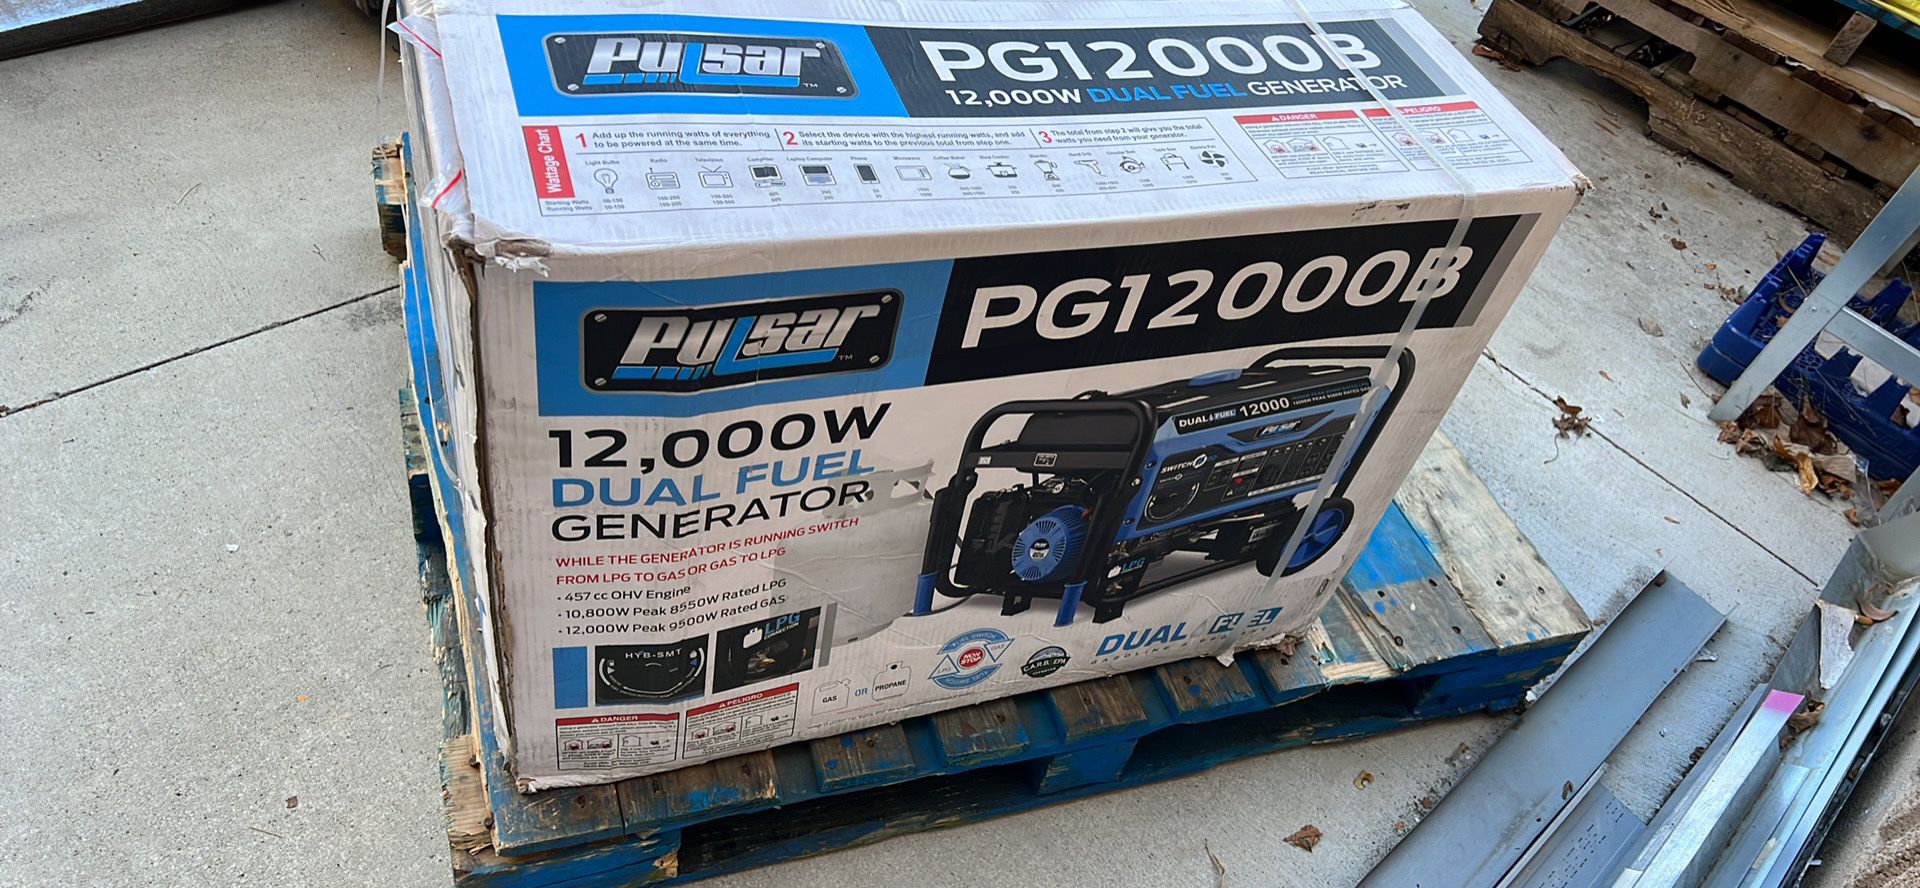 Pulsar 12,000W Dual Fuel Portable Generator with Electric Start and Switch & Go Technology, CARB 